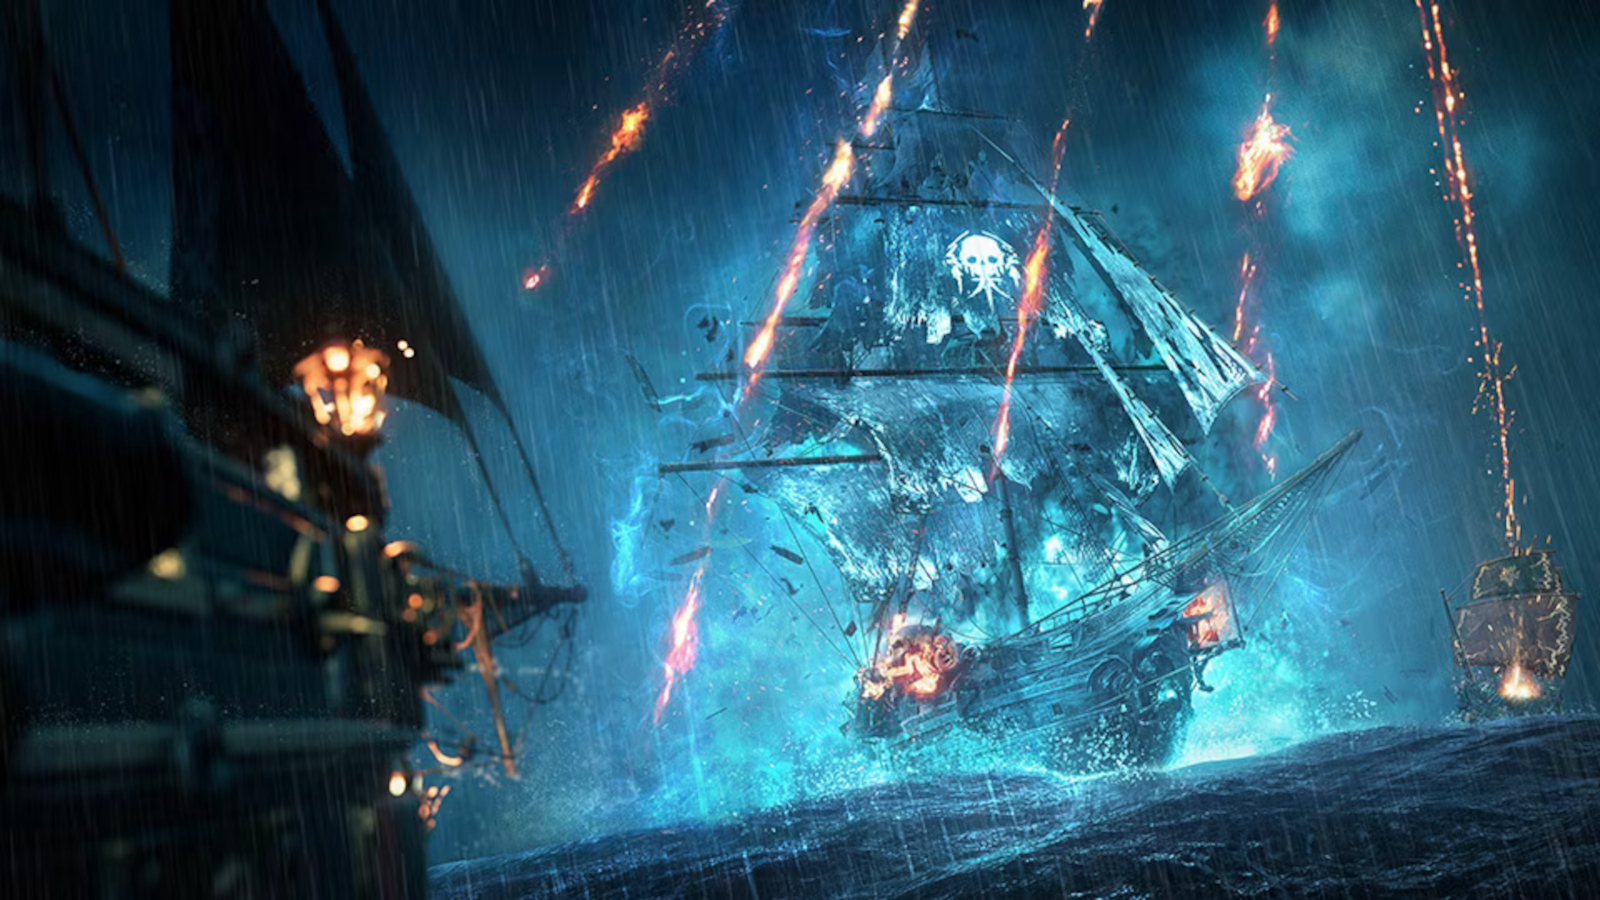 It's Almost The Pirates' Live As Skull And Bones Open Beta Dates Are Revealed